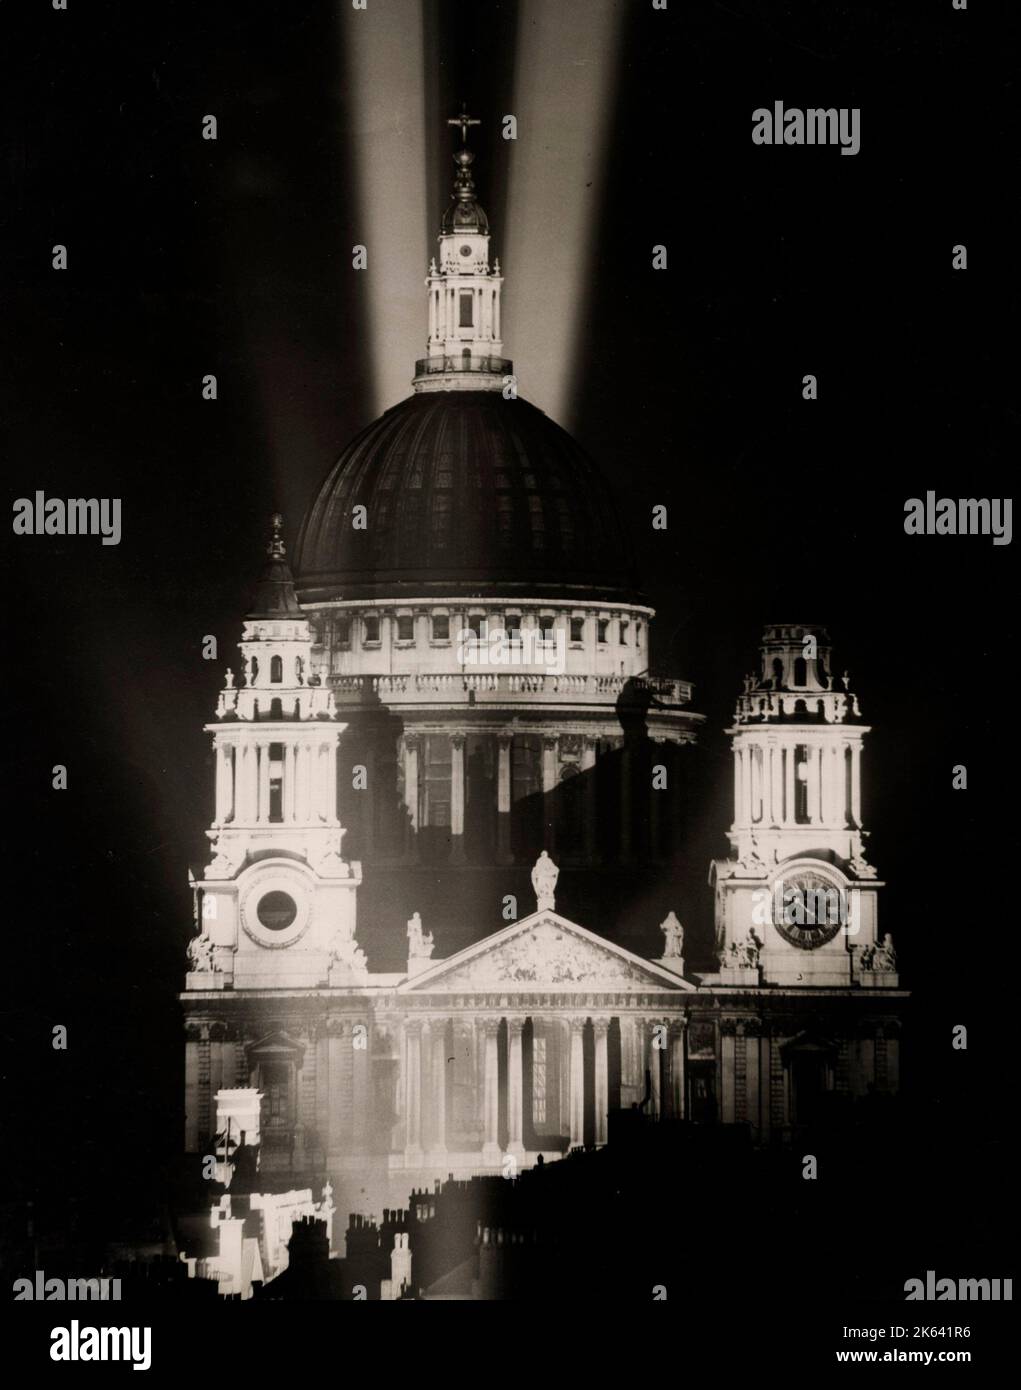 World War II 1945. St Paul's Cathedral, London, lit up on VE night - May 8th - the first time it had been illuminated in nearly 6 years Stock Photo